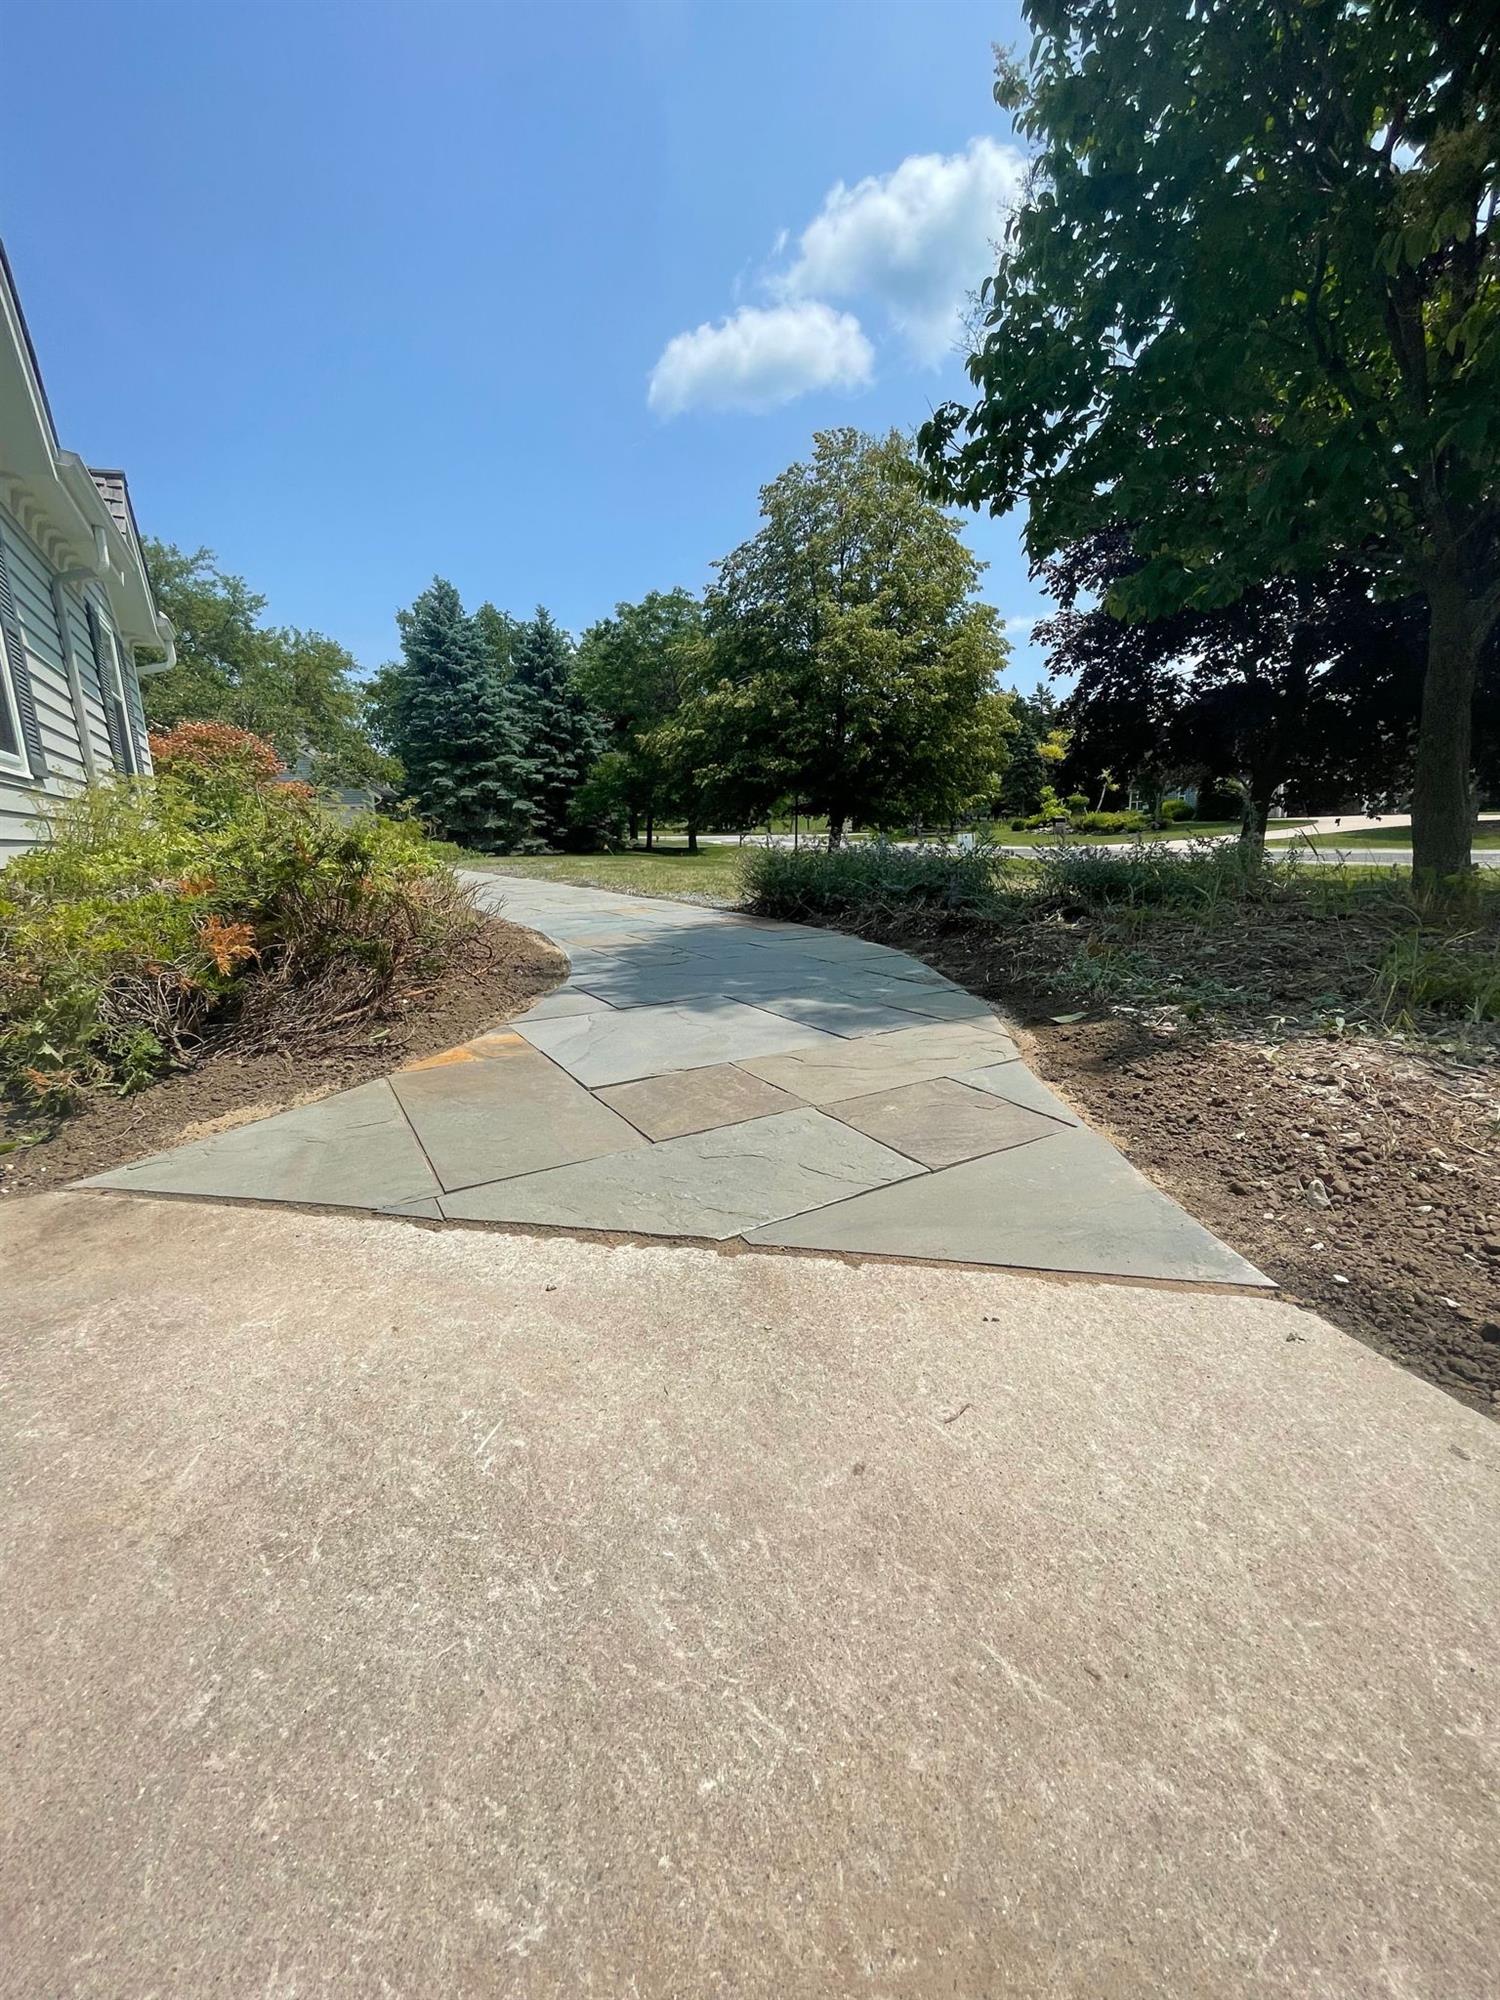 Paved path that wraps around the side of the house